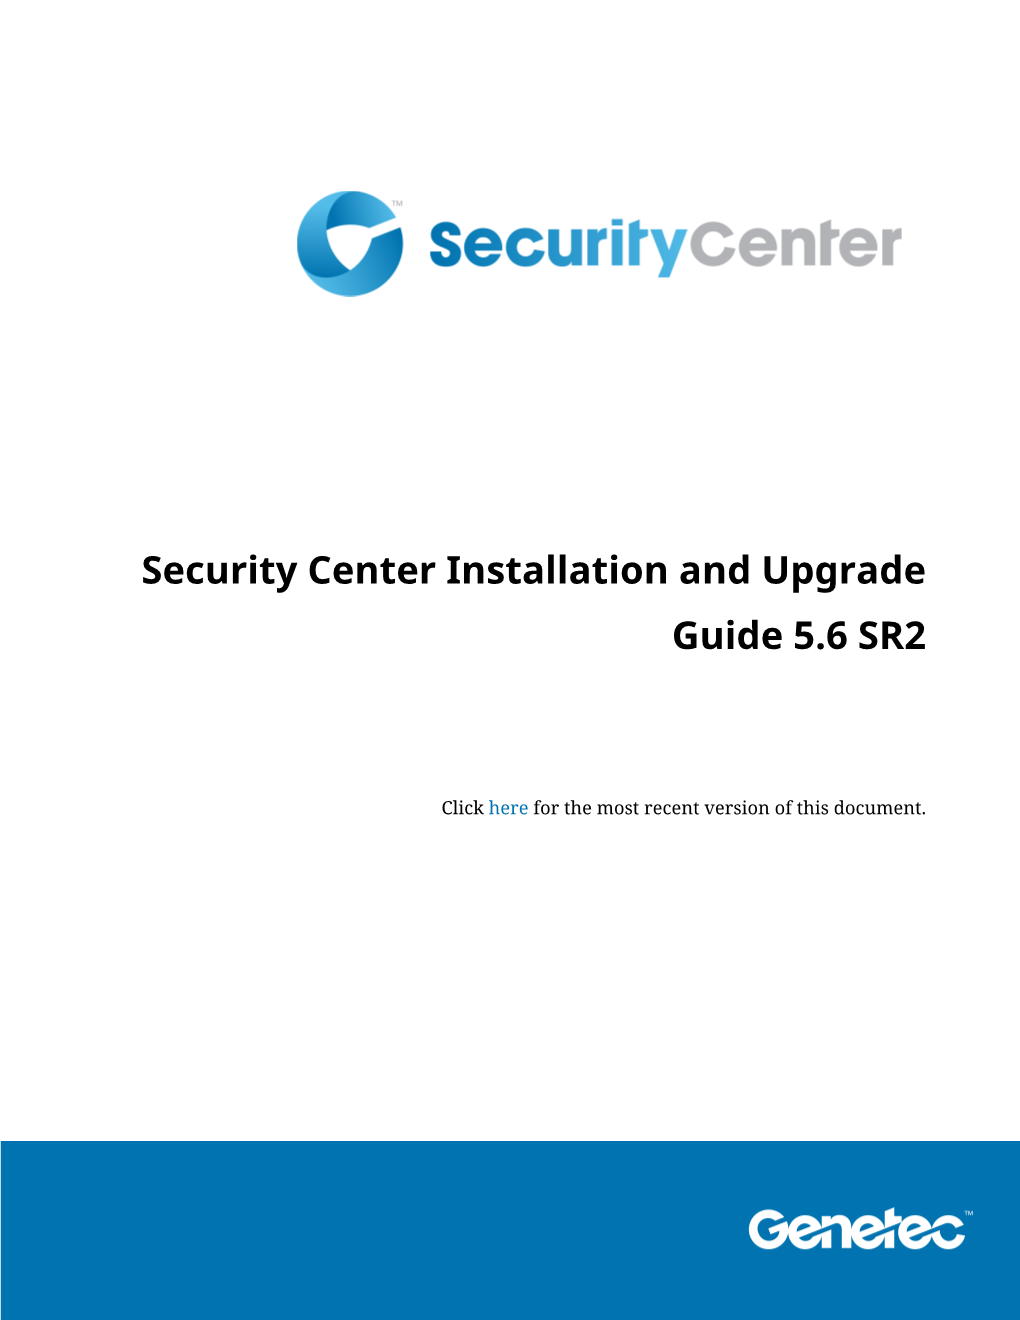 Security Center Installation and Upgrade Guide 5.6 SR2